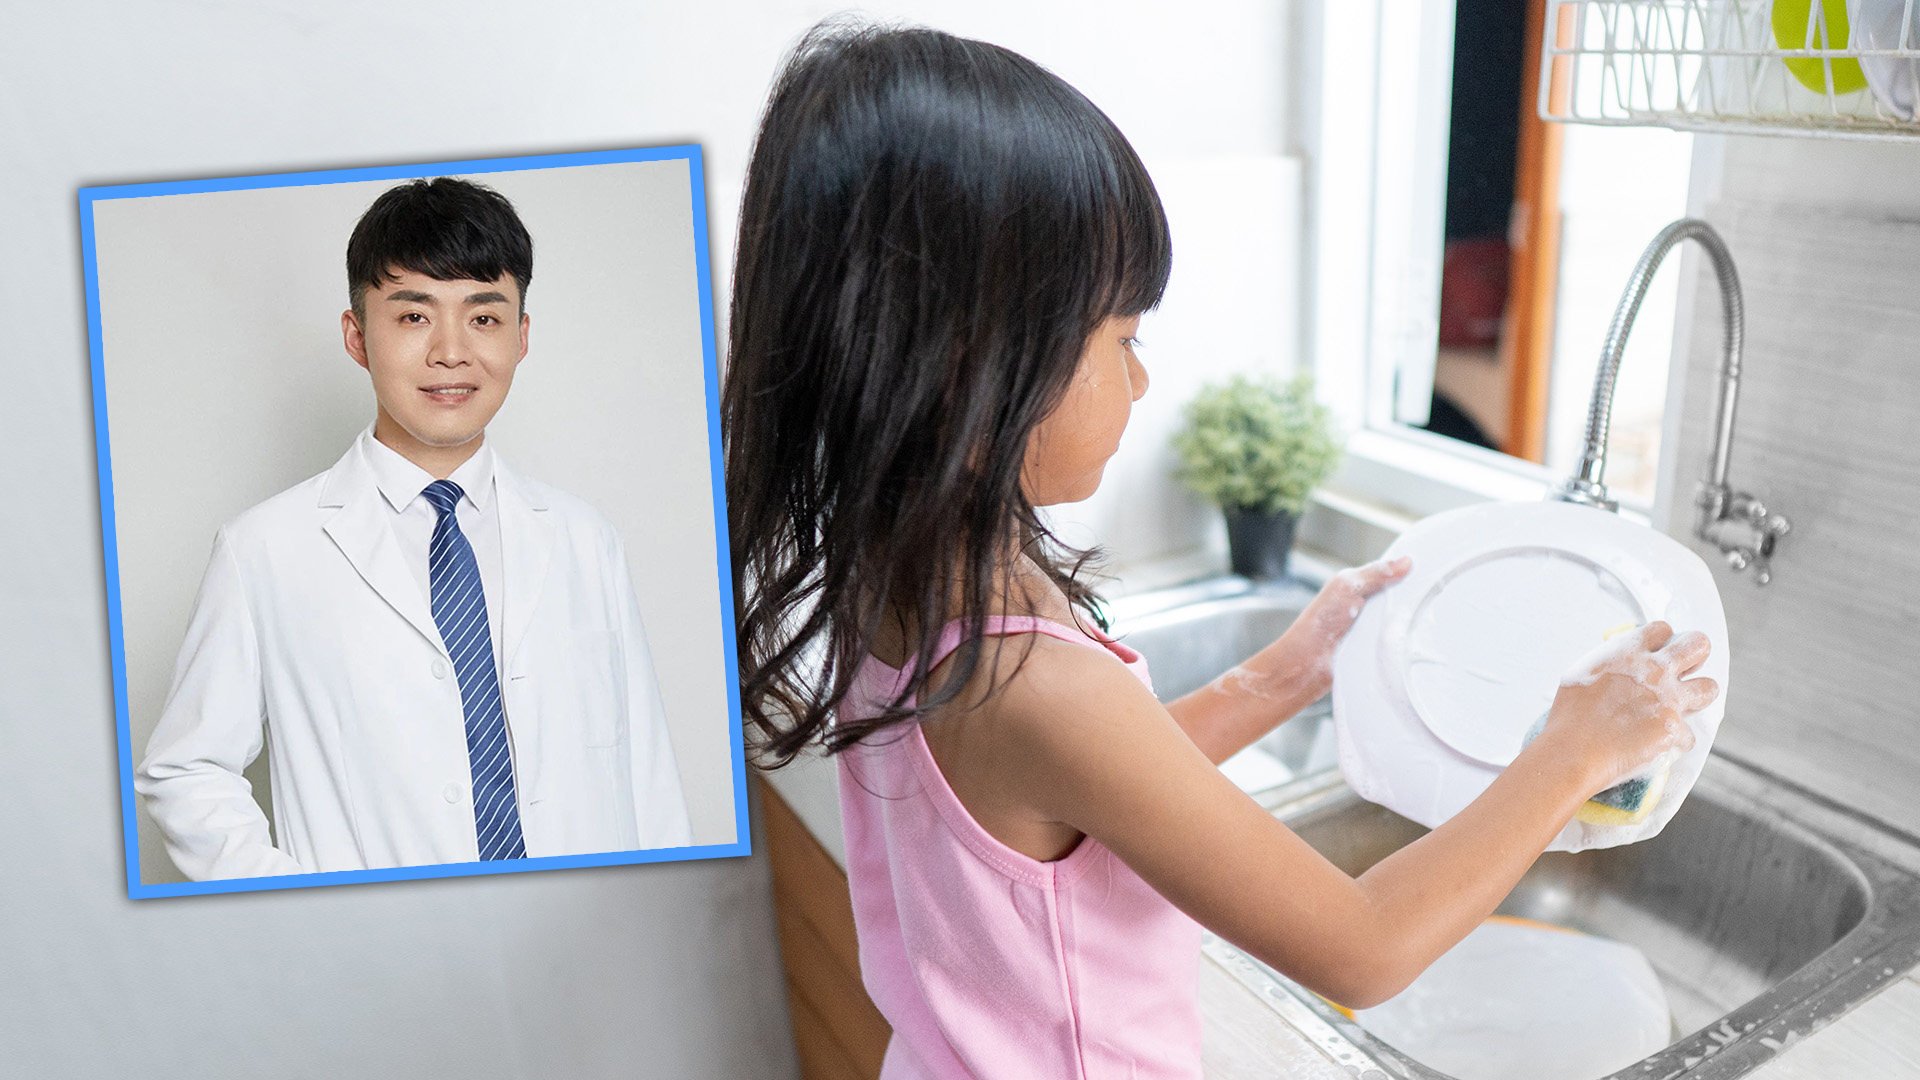 A famous doctor in China, who gained nationwide sympathy after he was stabbed by an ex-patient with a grudge, has faced criticism over comments he made on mainland social media about bringing up a “fair lady” daughter. Photo: SCMP composite/Shutterstock/The Paper